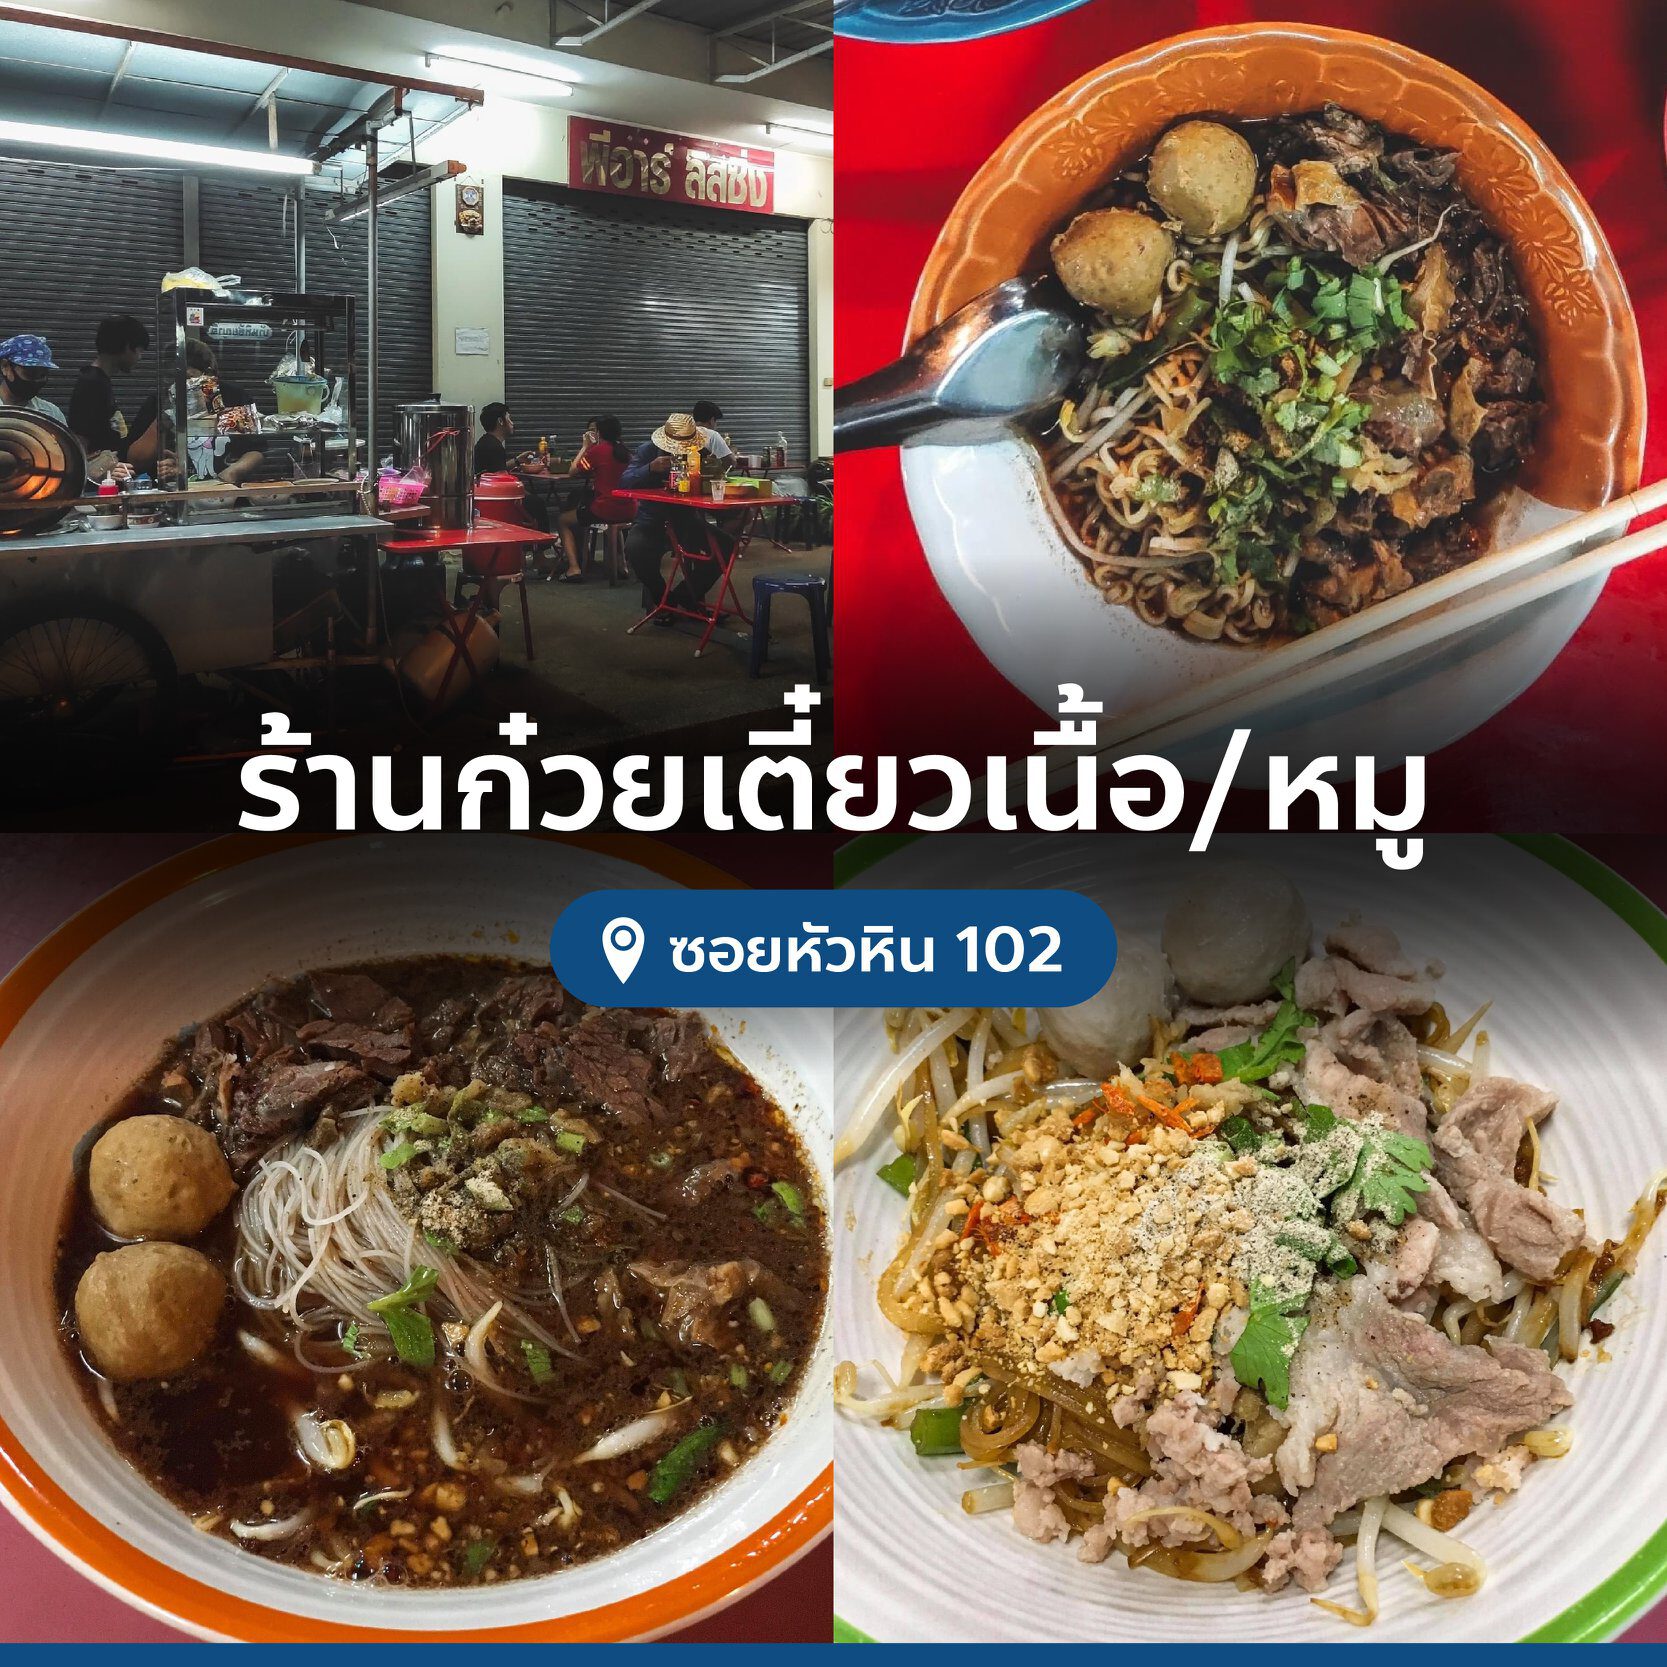 noodle-pork-and-beef-huahin-102-1988390